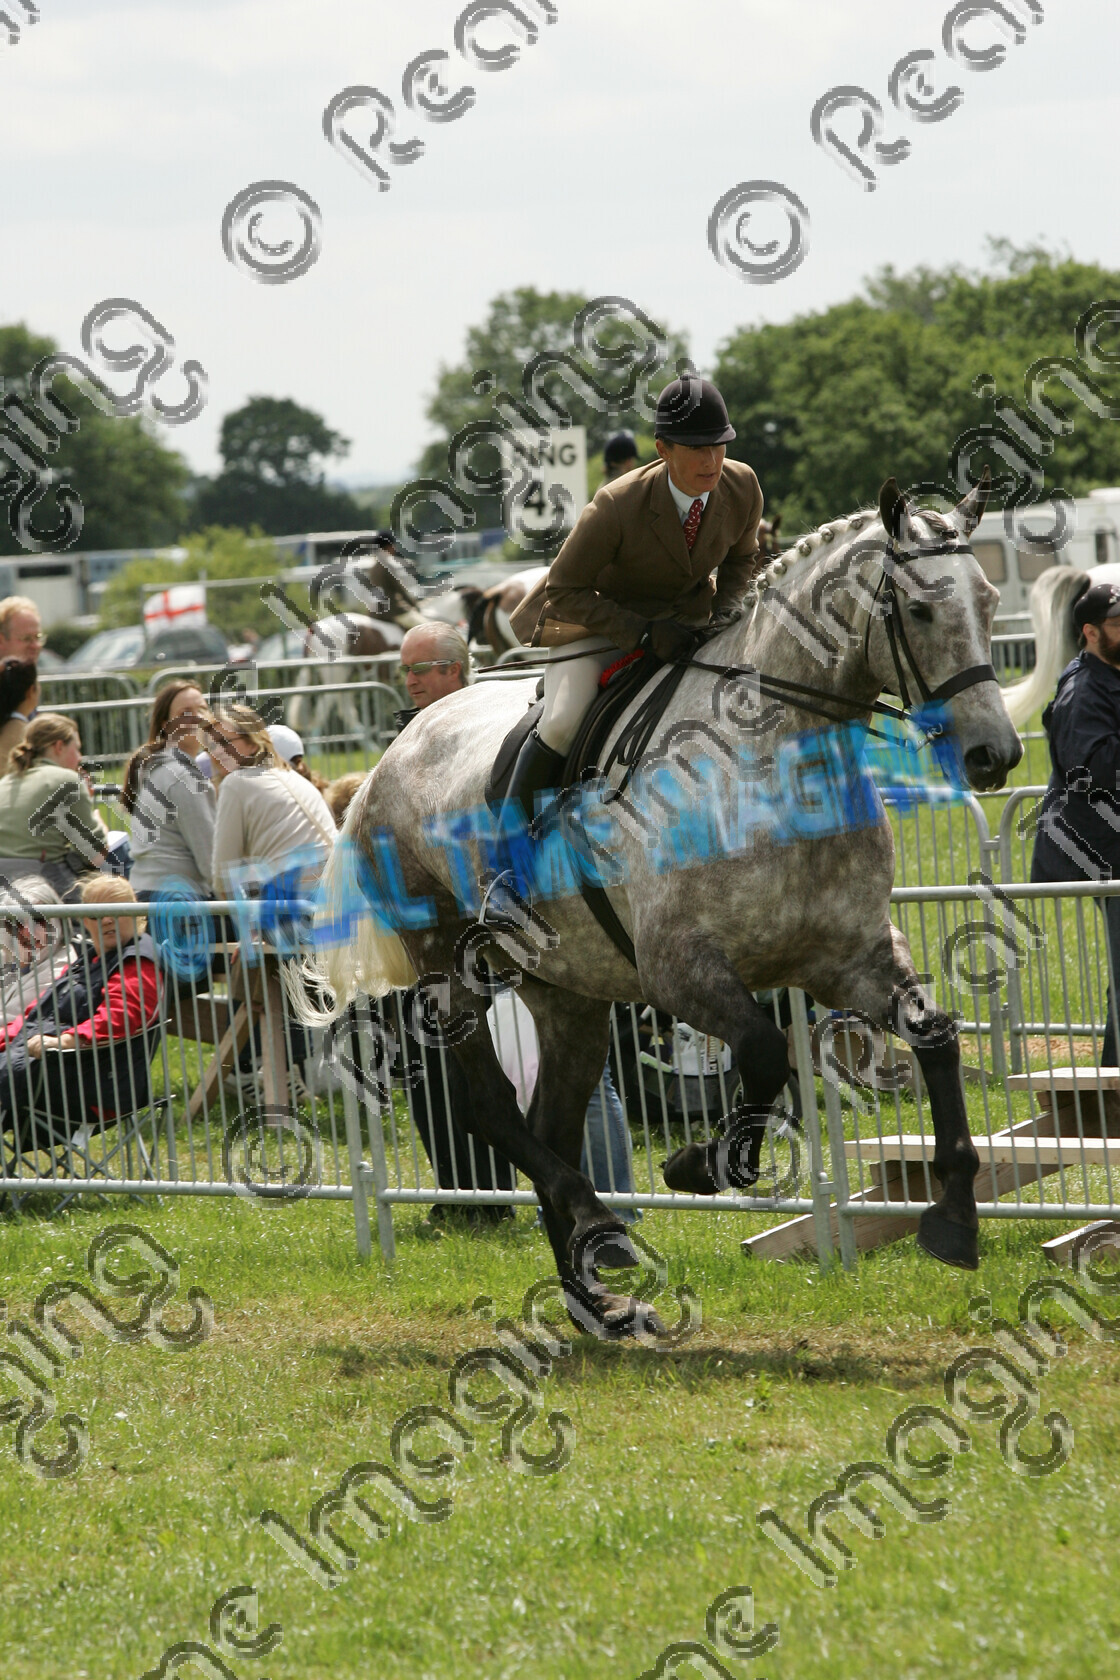 S06-26-5-162 
 Keywords: Cheshire County Show
Tuesday 20 June 2006
2238 SILVER STREAM
rider Jayne Webber
dappled grey gray
Heavyweight Hunter
horse pony show showing
rosette rosettes prize winner
champion first best
presentation award
gallop galloping action moving flat